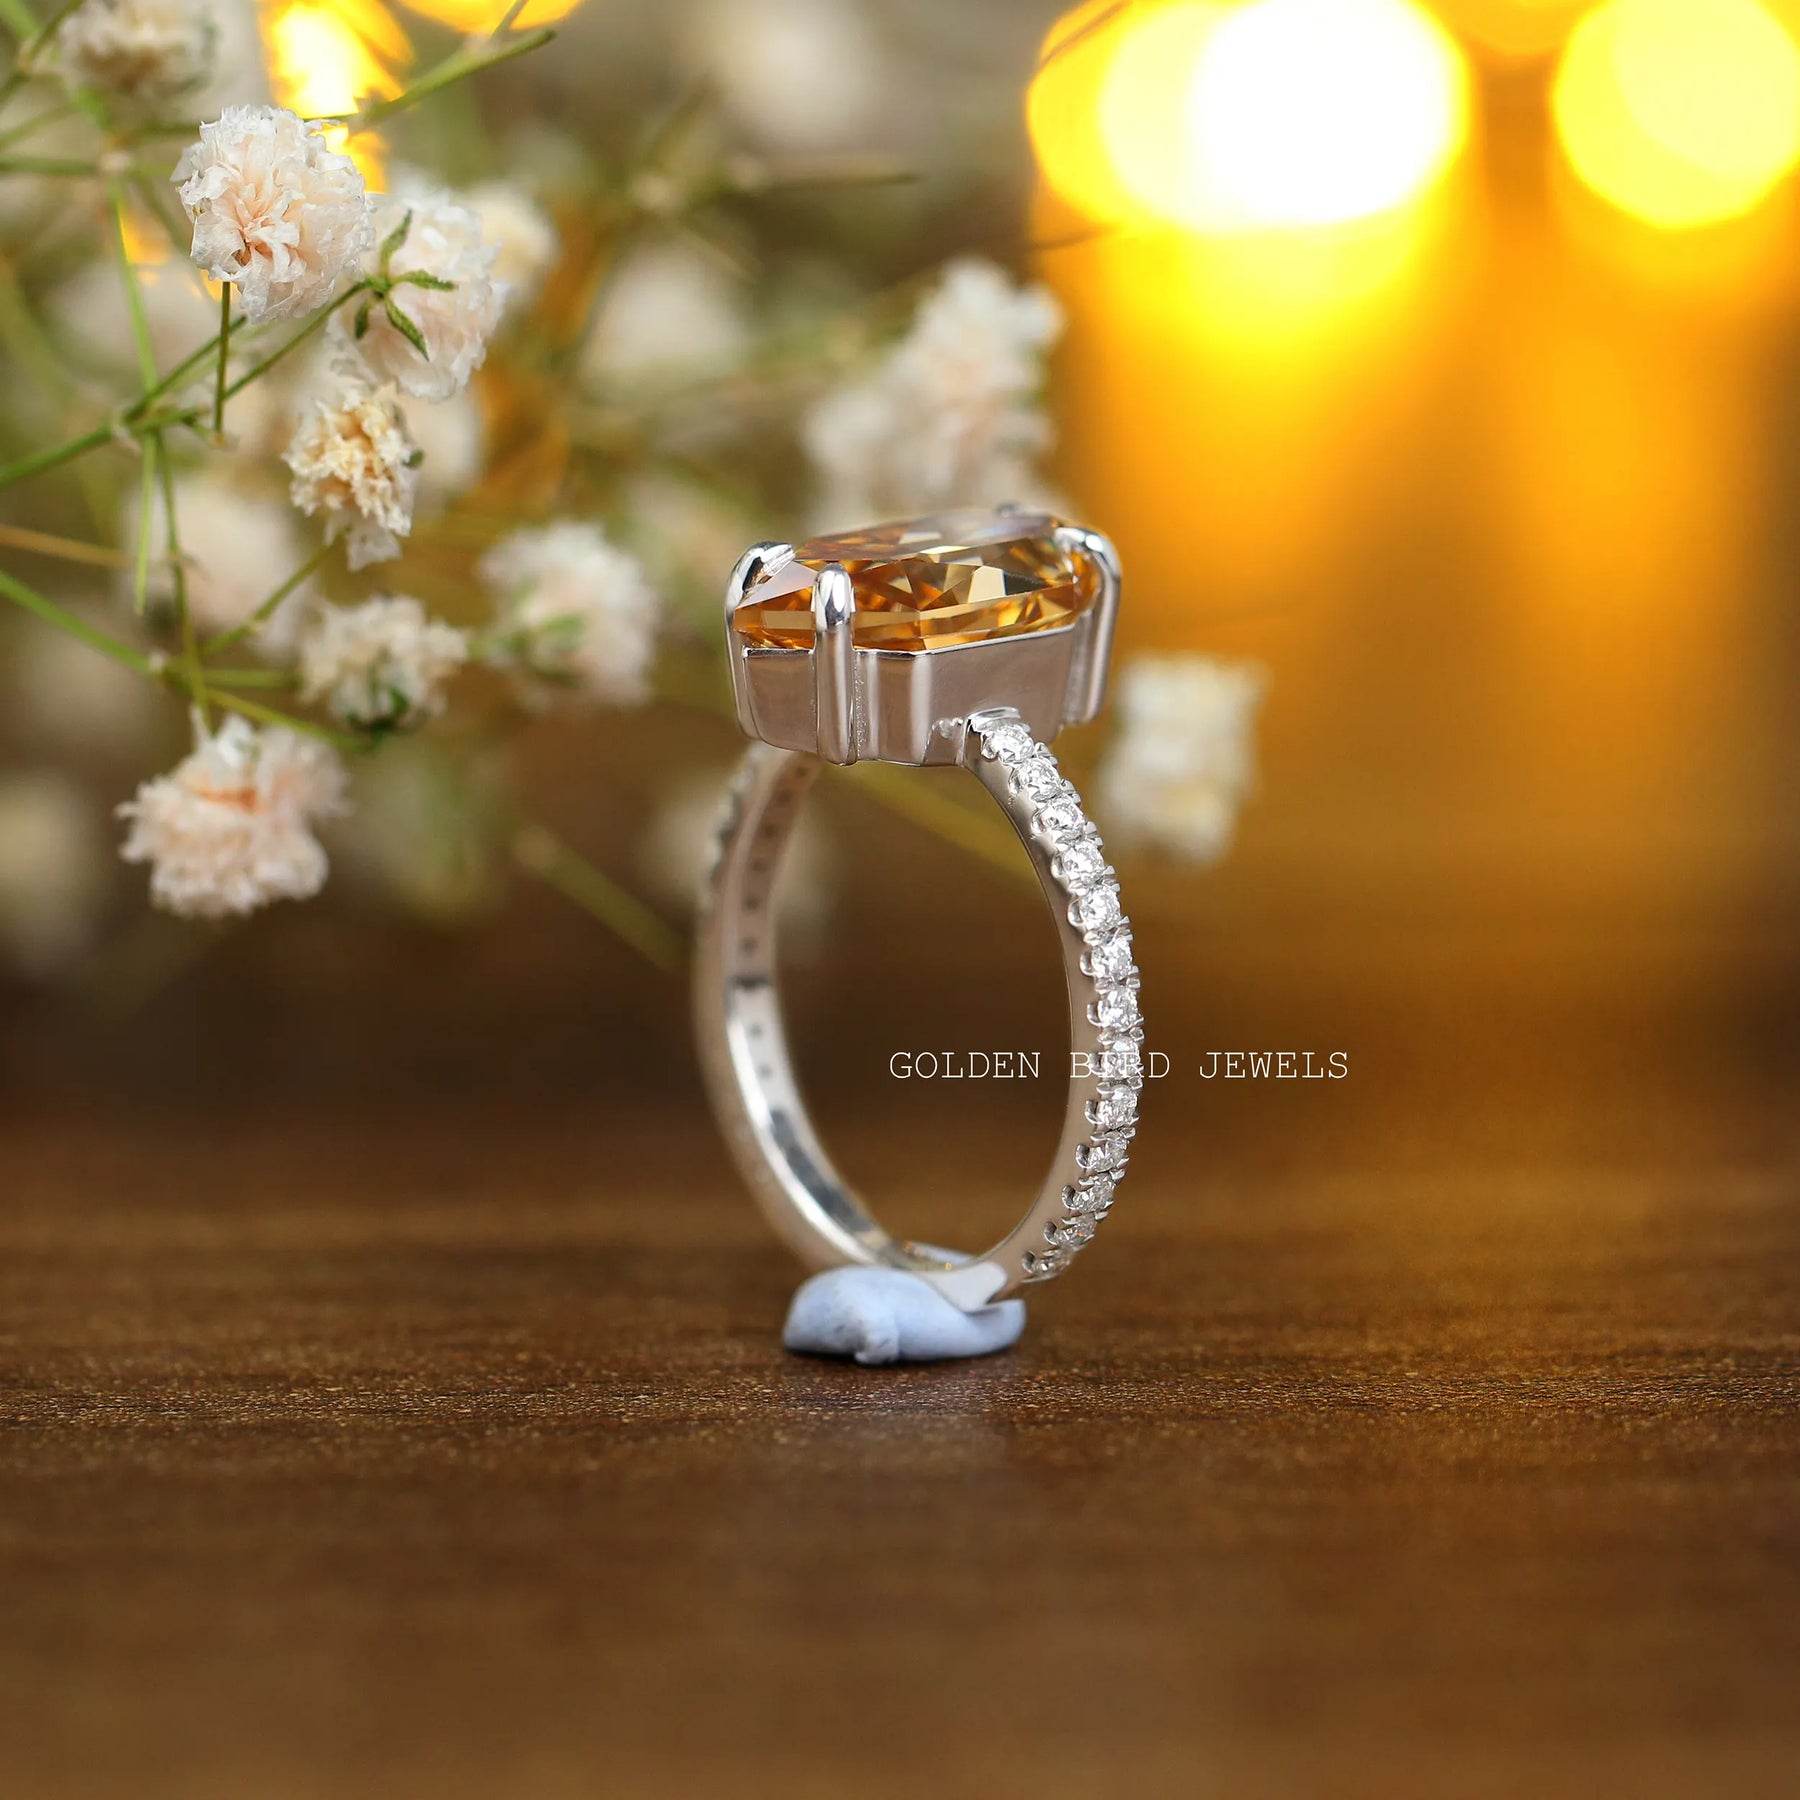 [This dutch marquise cut moissanite ring crafted with 4 prong setting]-[Golden Bird Jewels]